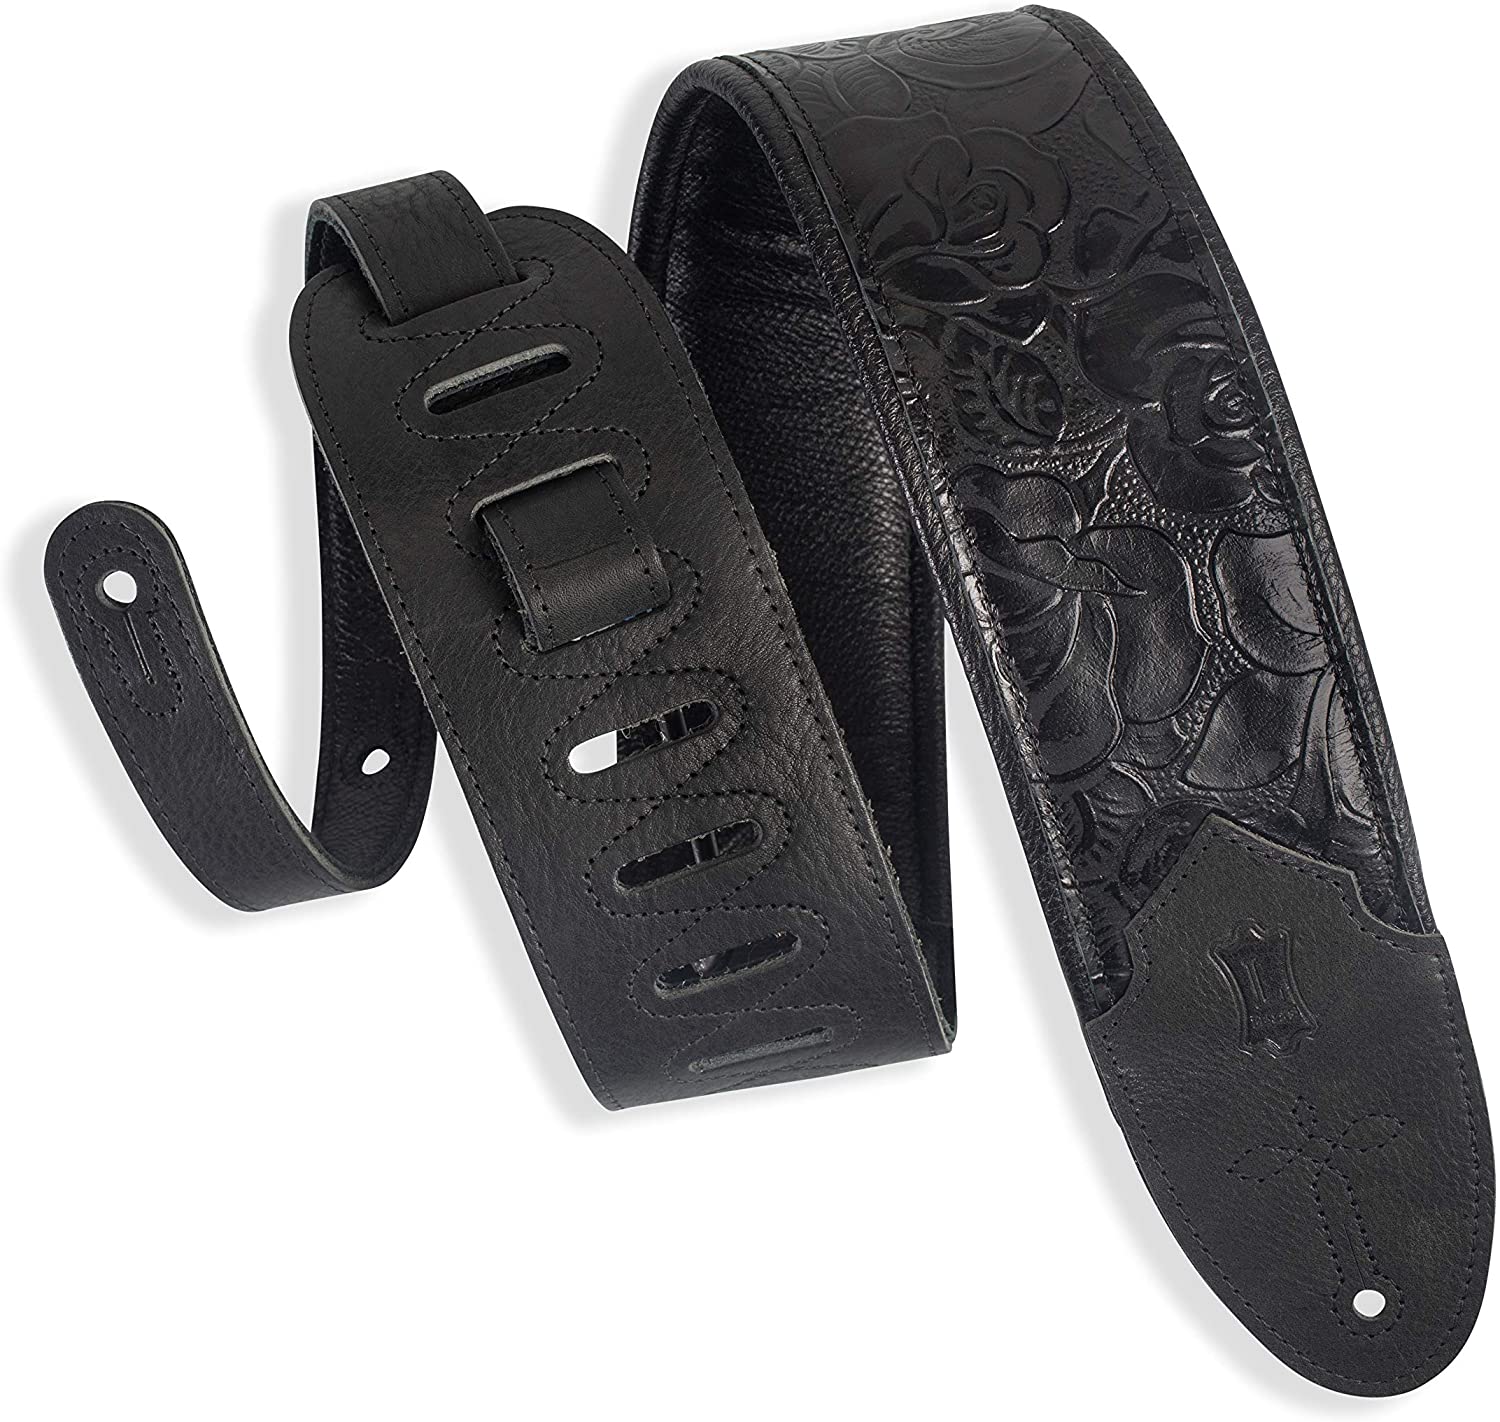 Photo4Less | Levy's Leathers 3 inch Wide Embossed Leather Guitar Strap  Black Rose